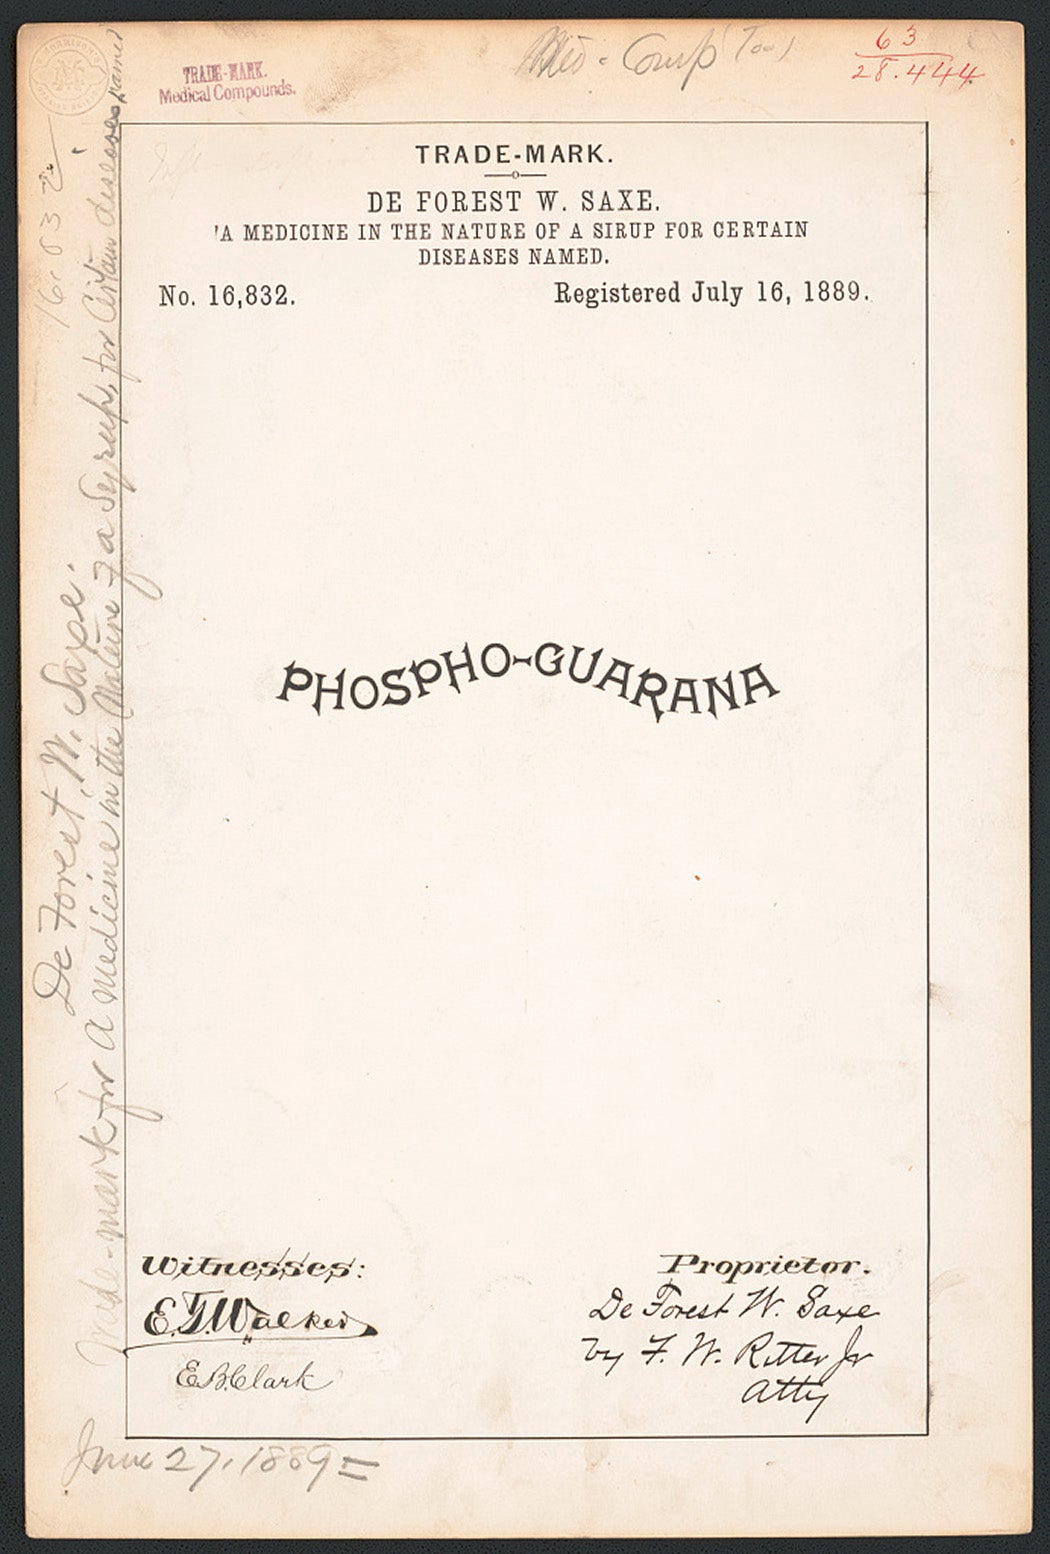 Trademark registration by De Forest W. Saxe for Phospho-Guarana, “A Medicine in the Nature of a Sirup for Certain Diseases Named,” Omaha, NE, 1889. Via The Library of Congress.